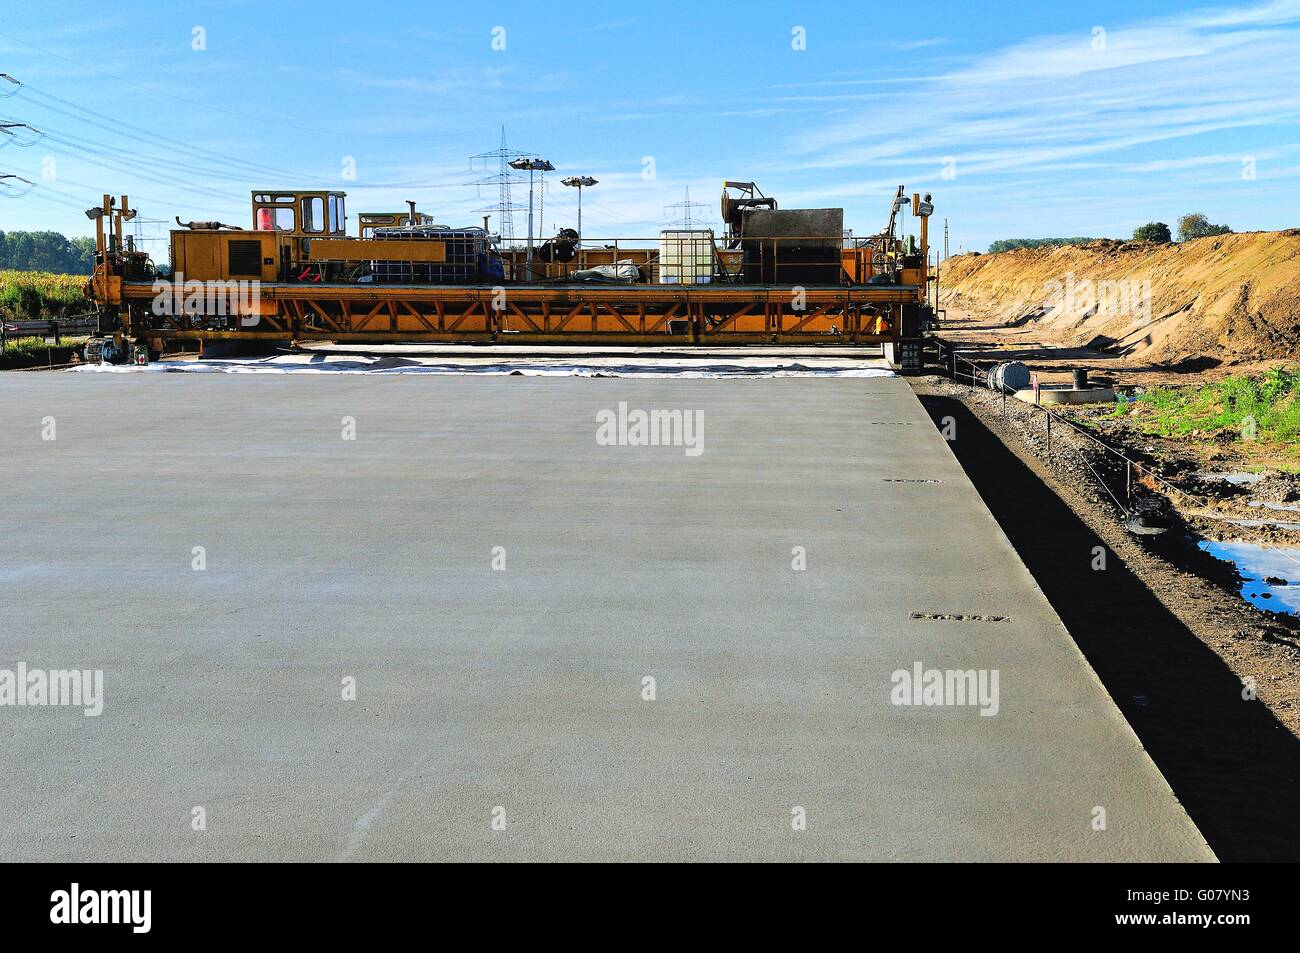 Freshly poured concrete finisher highway roadway, Stock Photo